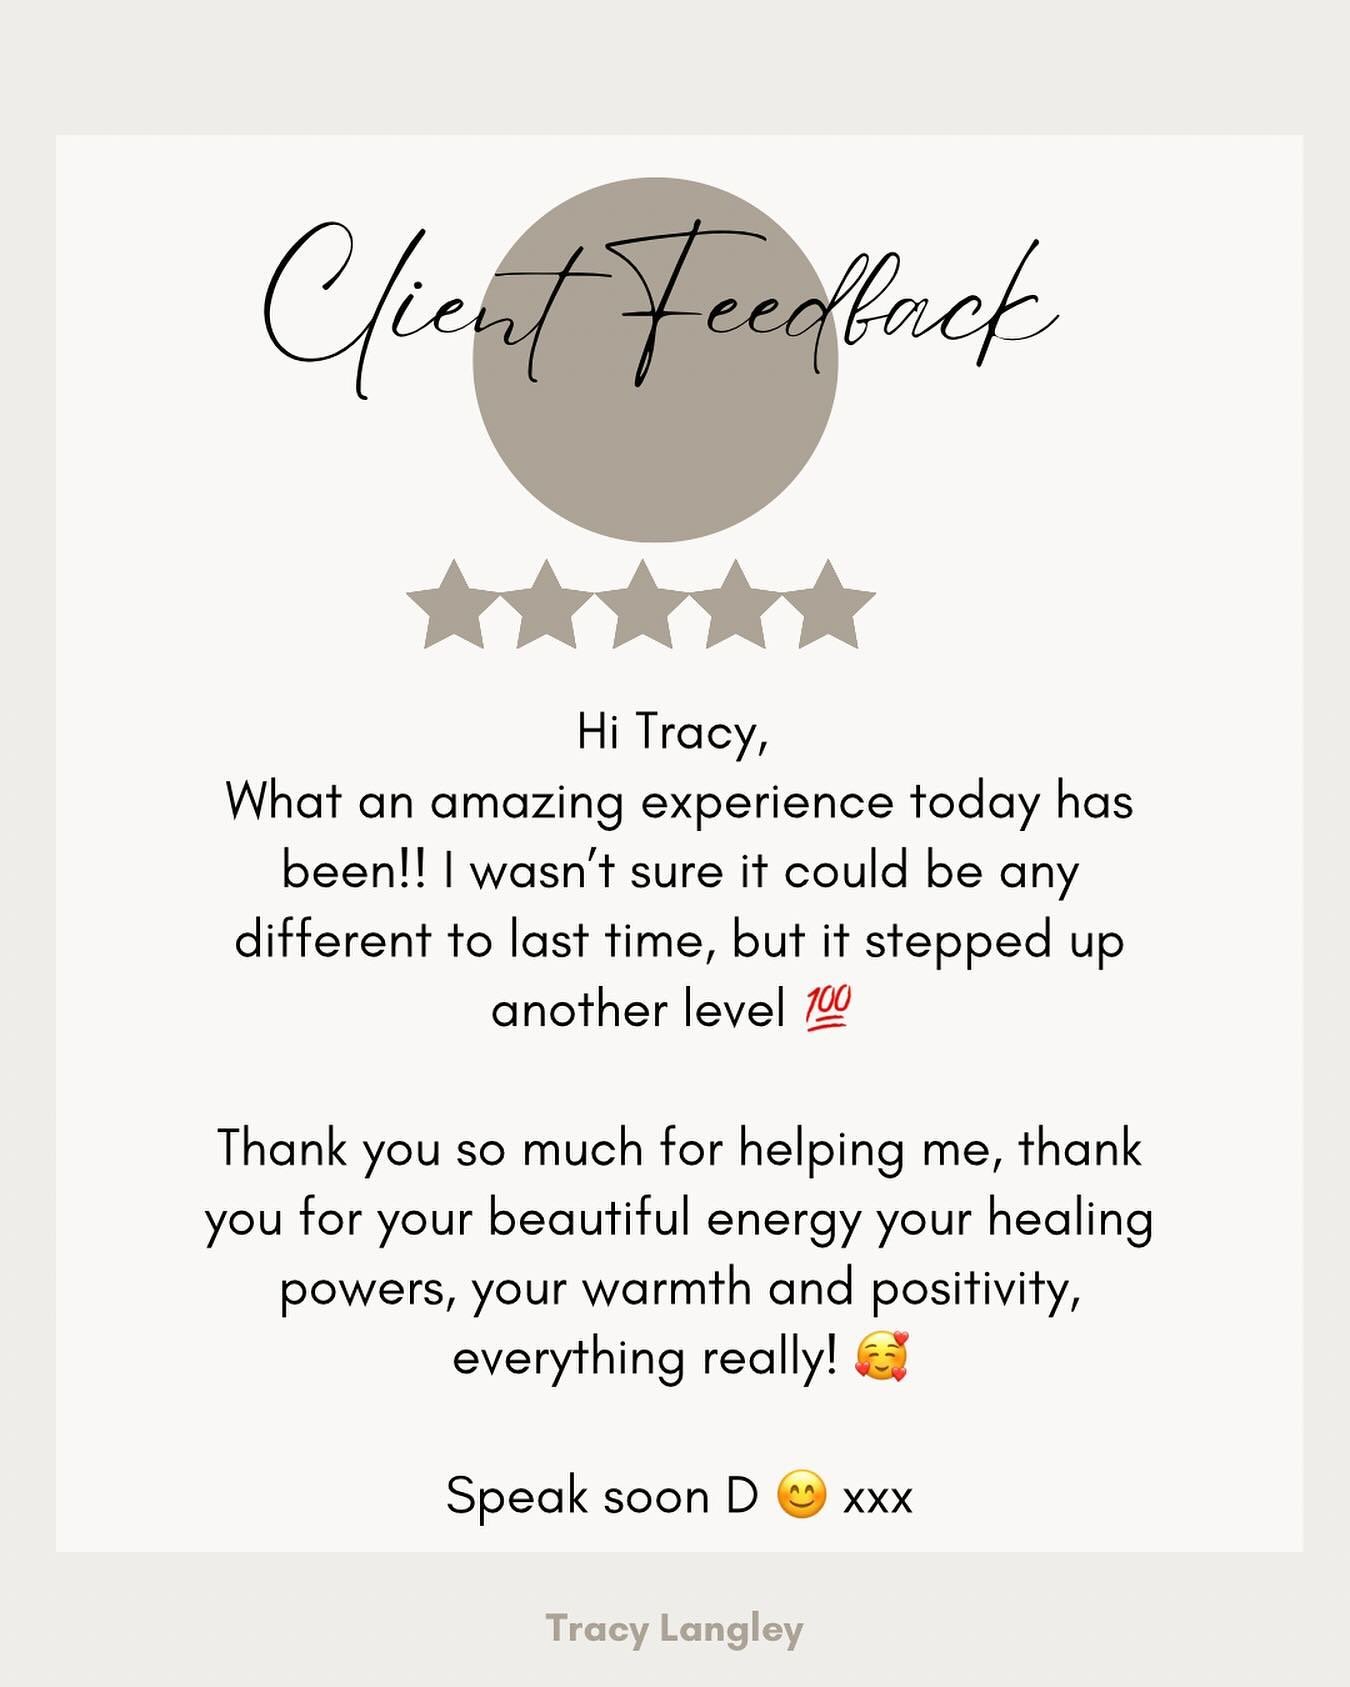 Thank you for beautiful client feedback 💕 #clientfeedback #feelingloved #grattitude